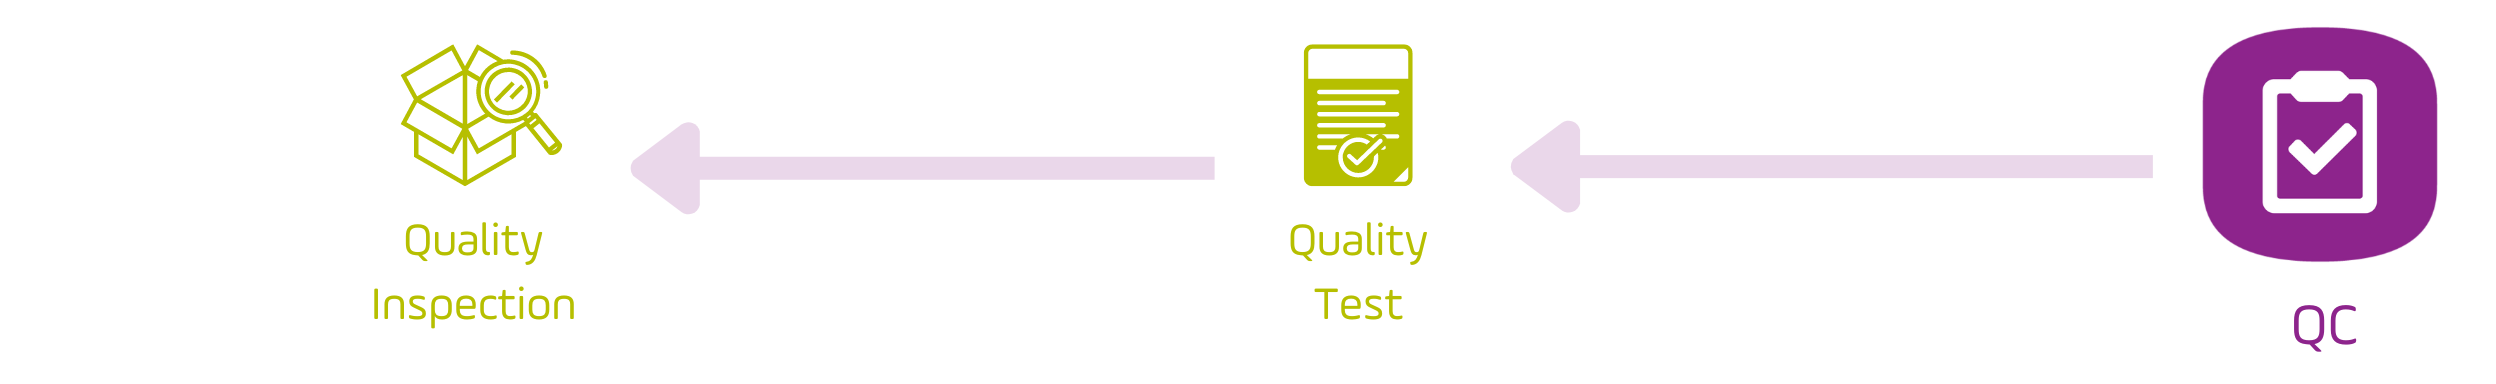 Icons for optimizing quality control with the help of Setlog OSCA QC